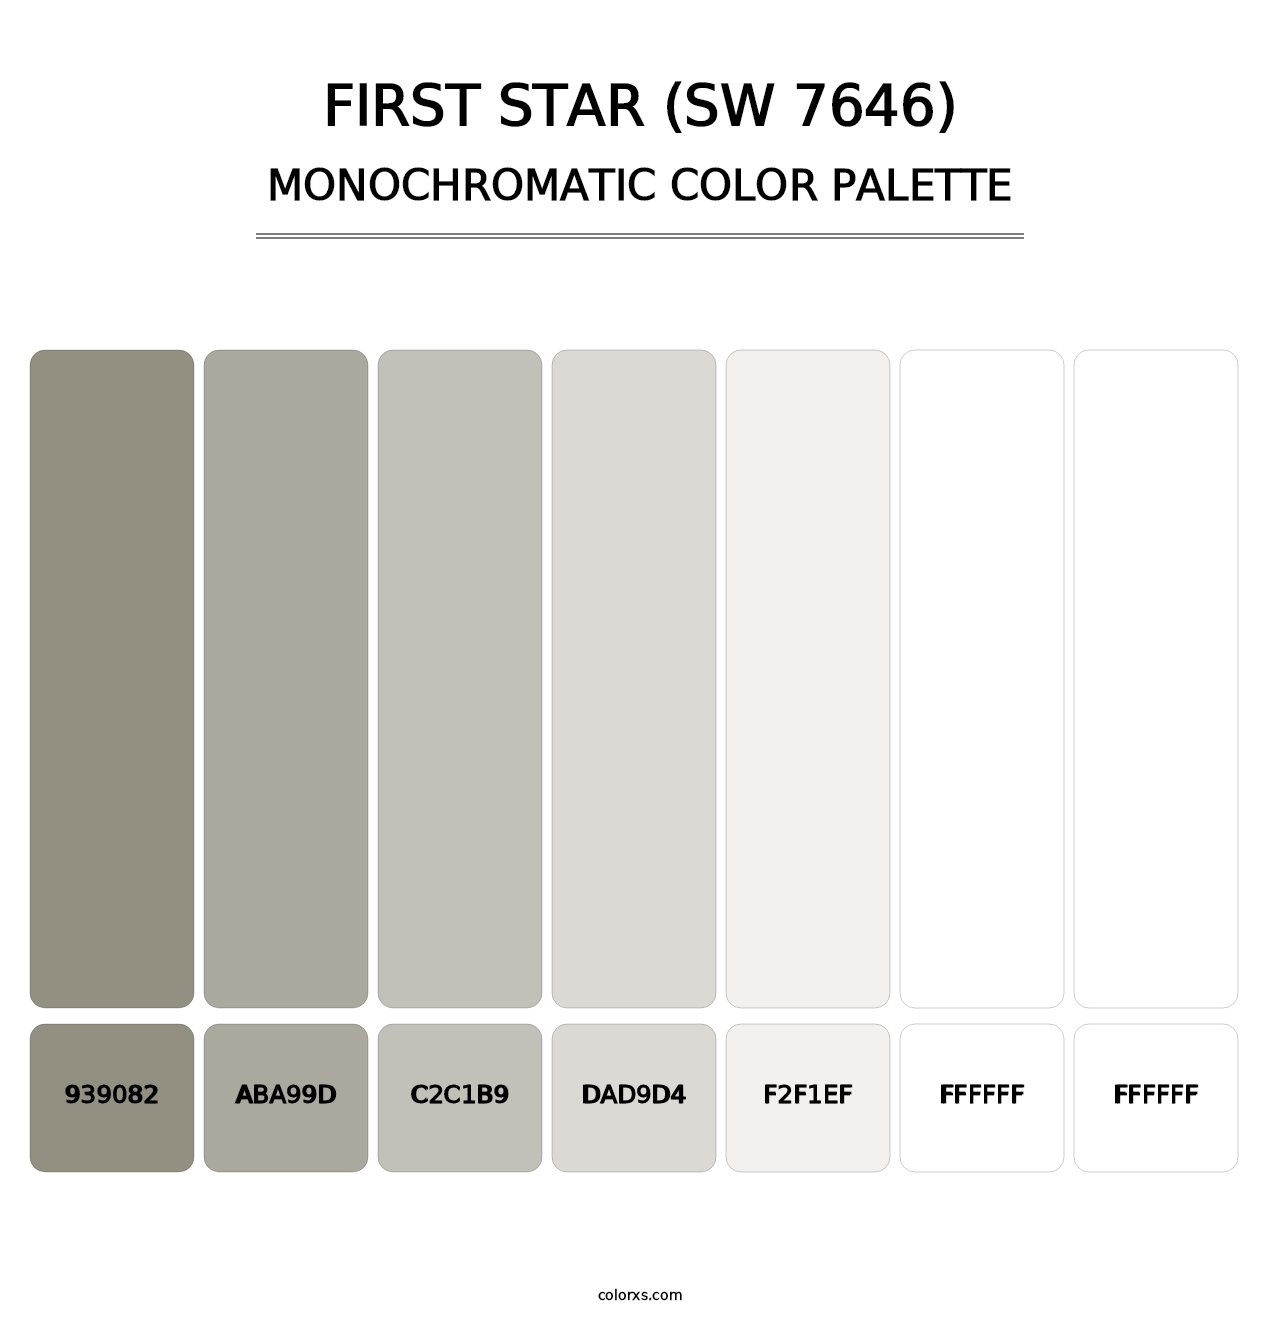 First Star (SW 7646) - Monochromatic Color Palette